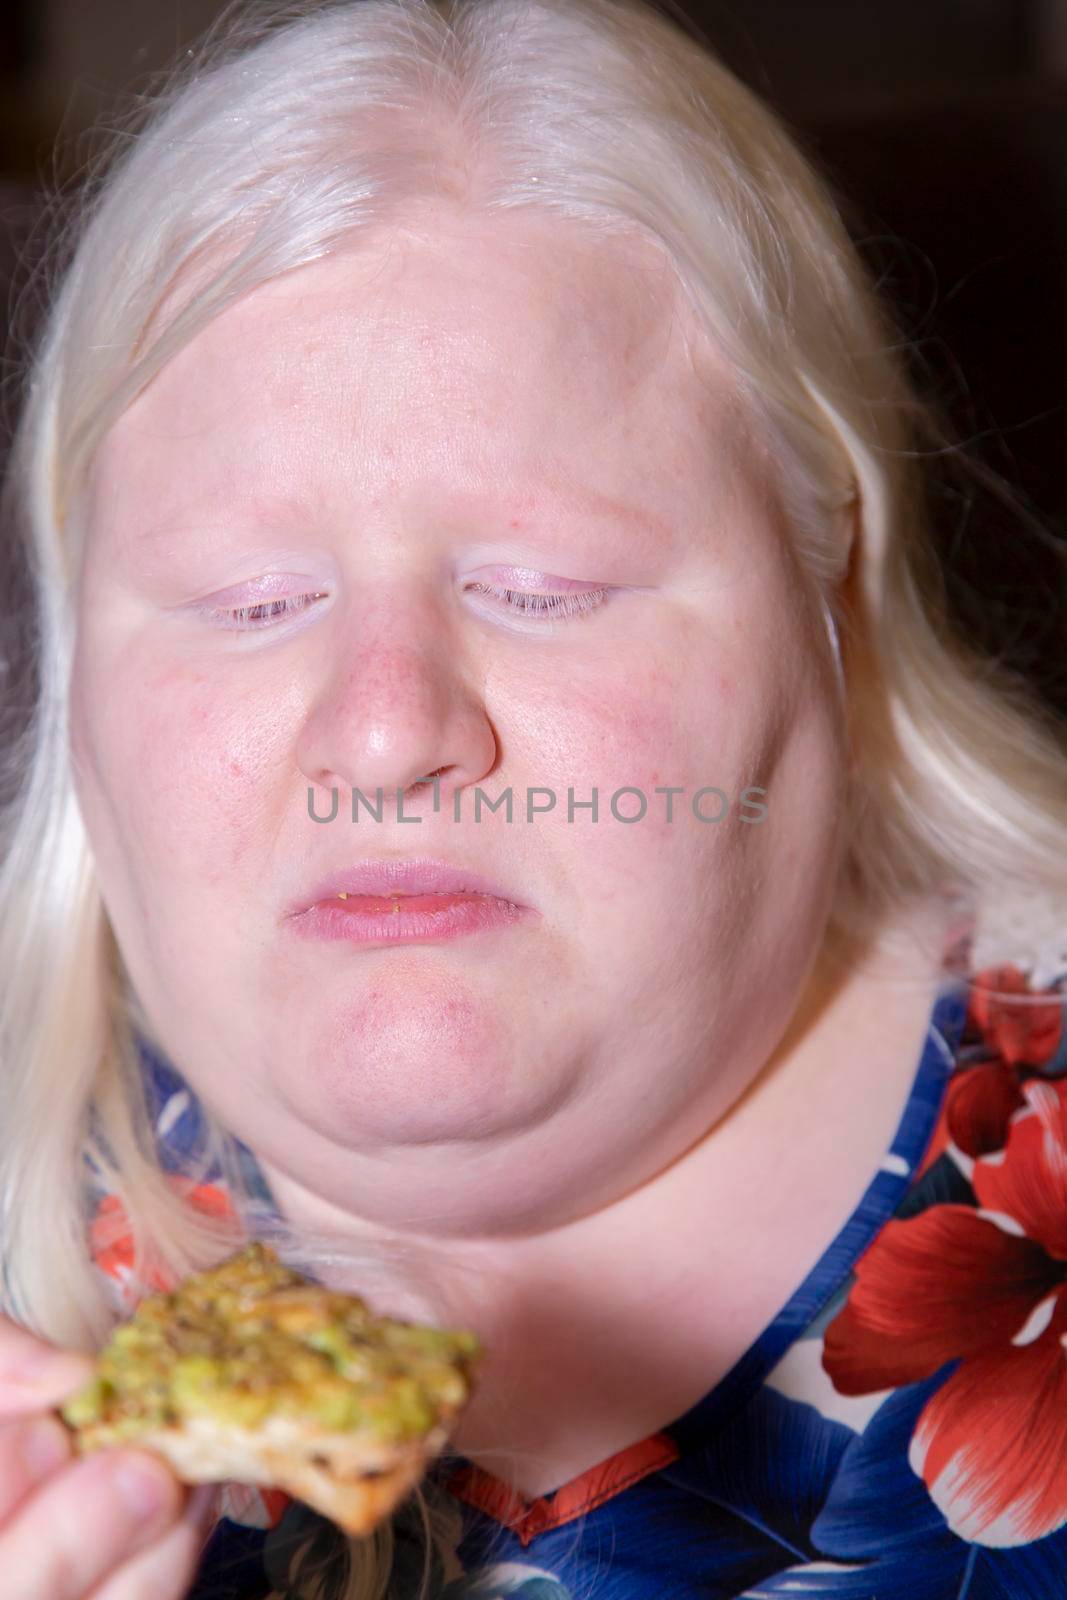 Albino woman thinking serious or sad thoughts while she eats avocado toast